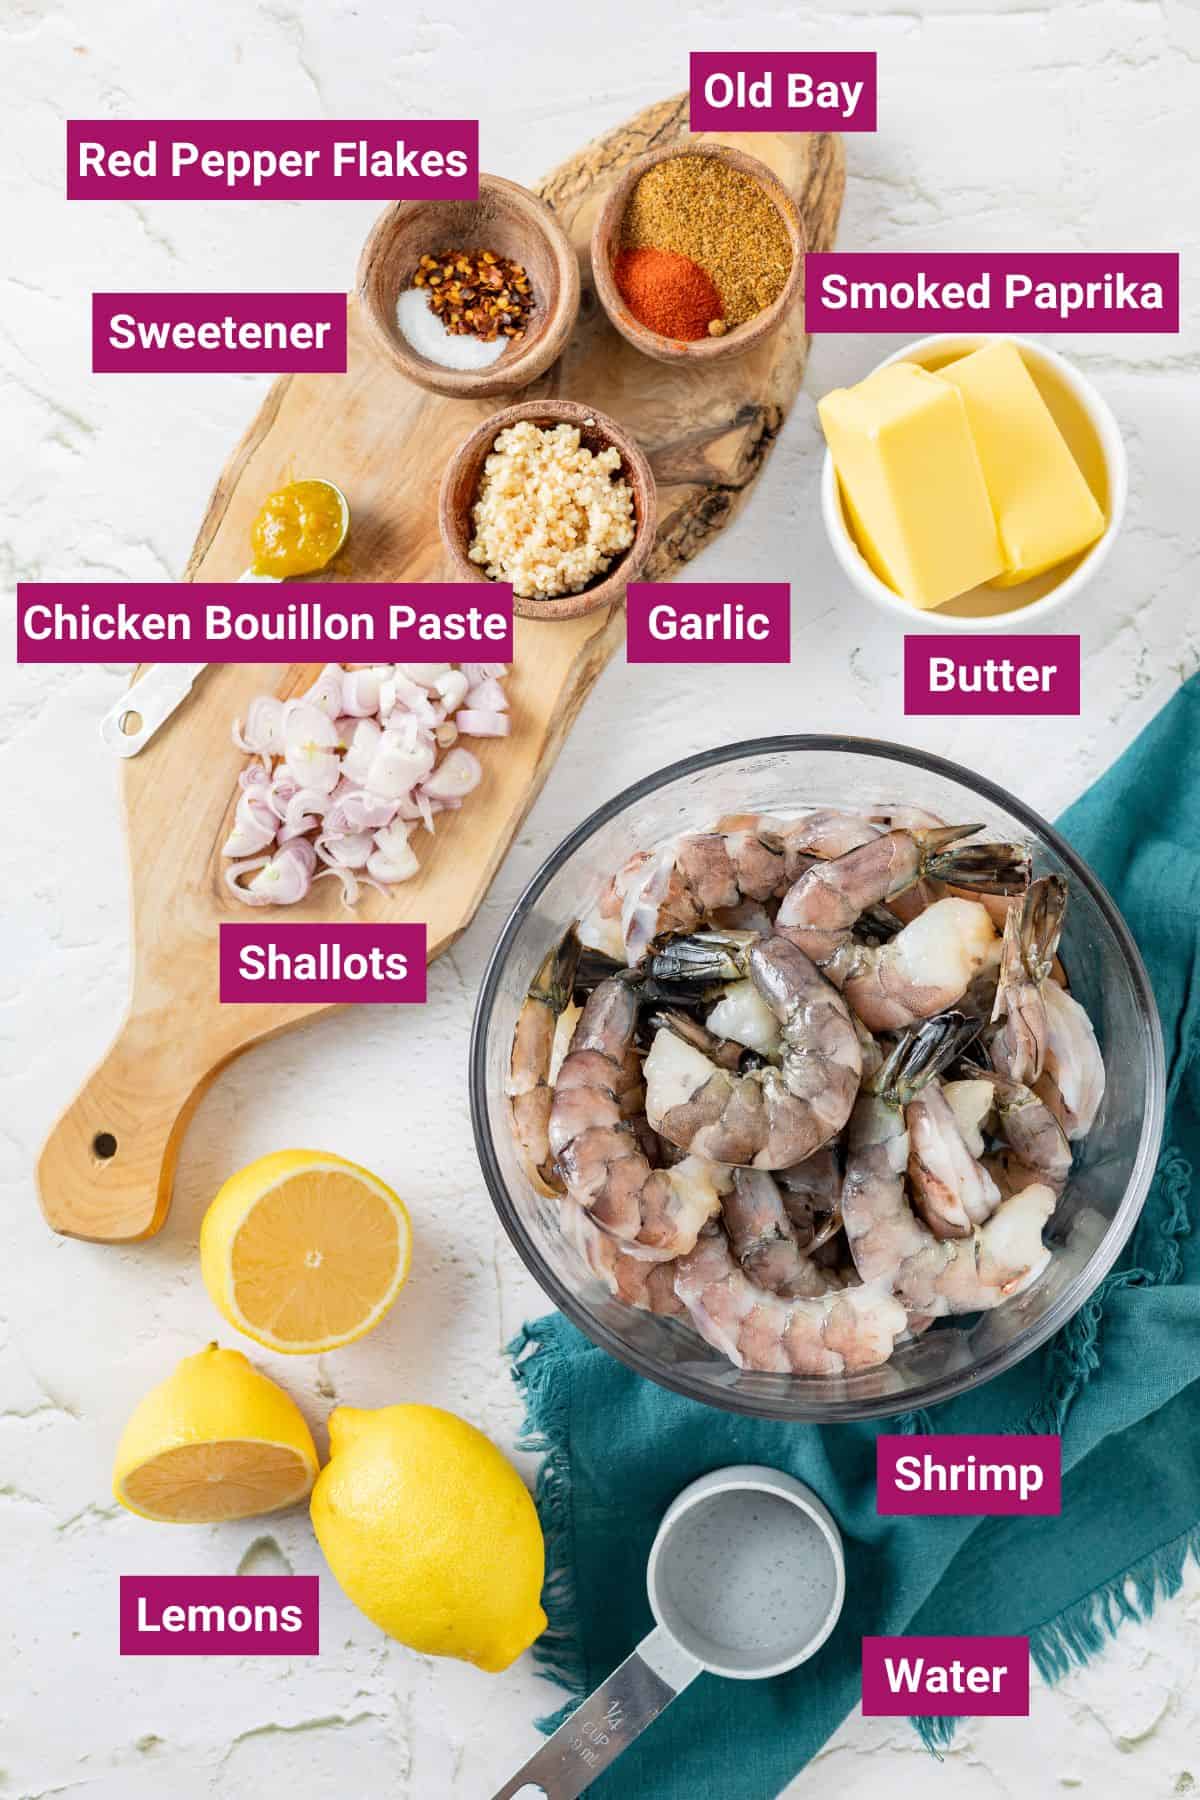 Shrimp, Butter, Shallots, garlic, Lemons, Chicken bouillon paste, Water, Sweetener, Red pepper flakes, Old bay, Smoked paprika on separate bowls and table spoons